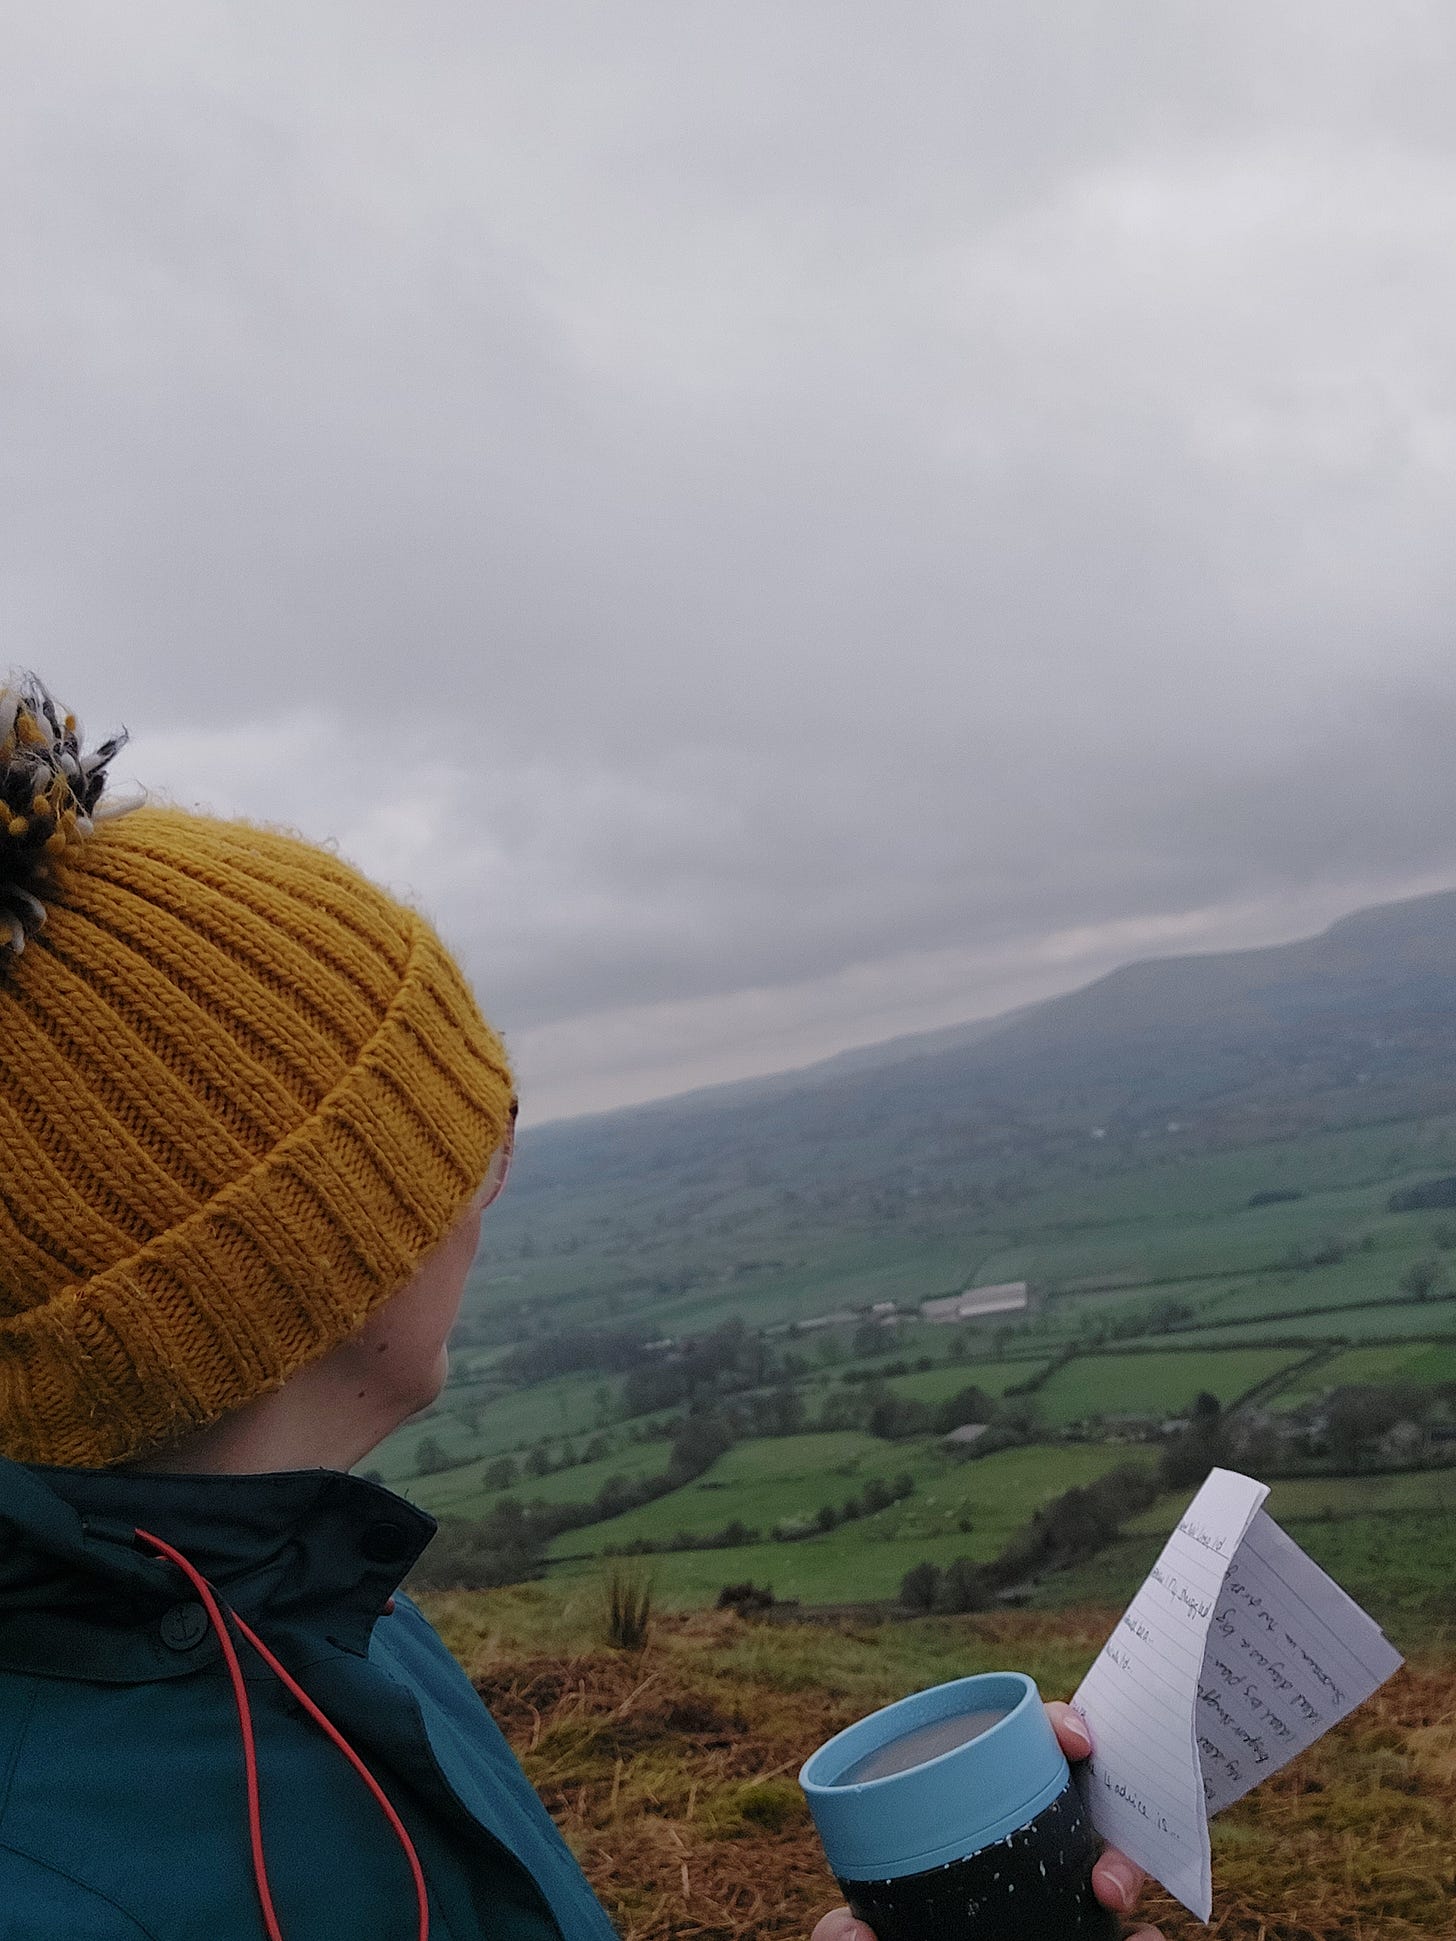 Person wearing a yellow hat gazing at out at a misty rural view of green fields. They are holding a cut and a piece of paper with journal prompts on it